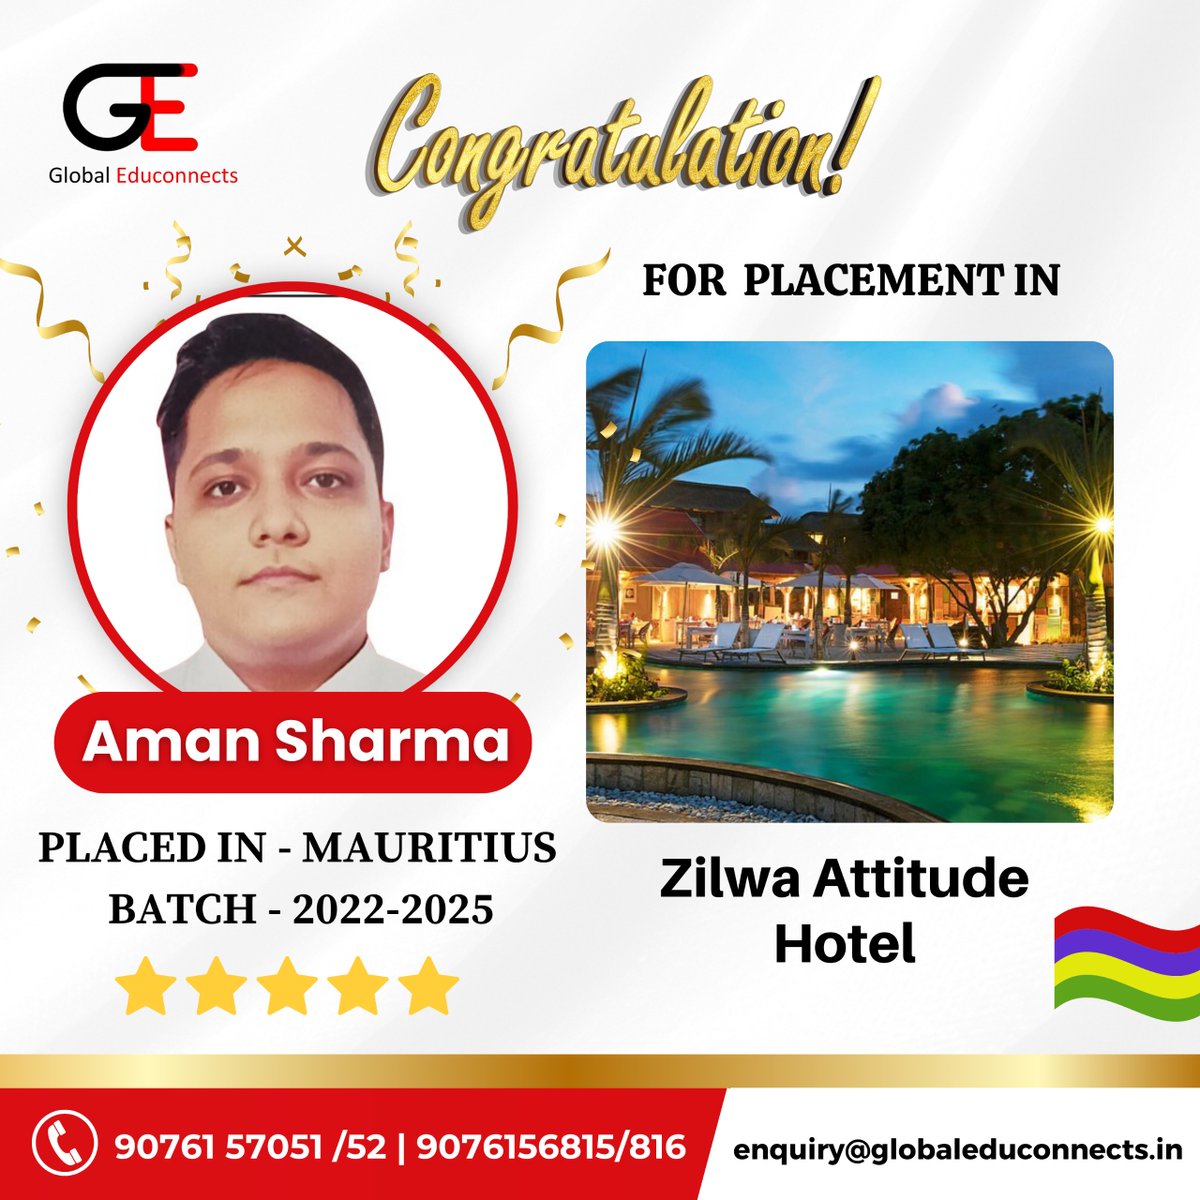 Congratulations!!! @x_amansharma__x, on successfully getting placed in Mauritius.

Call Now: +91 90761 57051 / 90761 57052

#placementyear #studyabroad #abroadstudy #mauritius #studyabroadlife #globaleduconencts #hospitalitymanagement #studyinmauritius #studyinmauritius2024